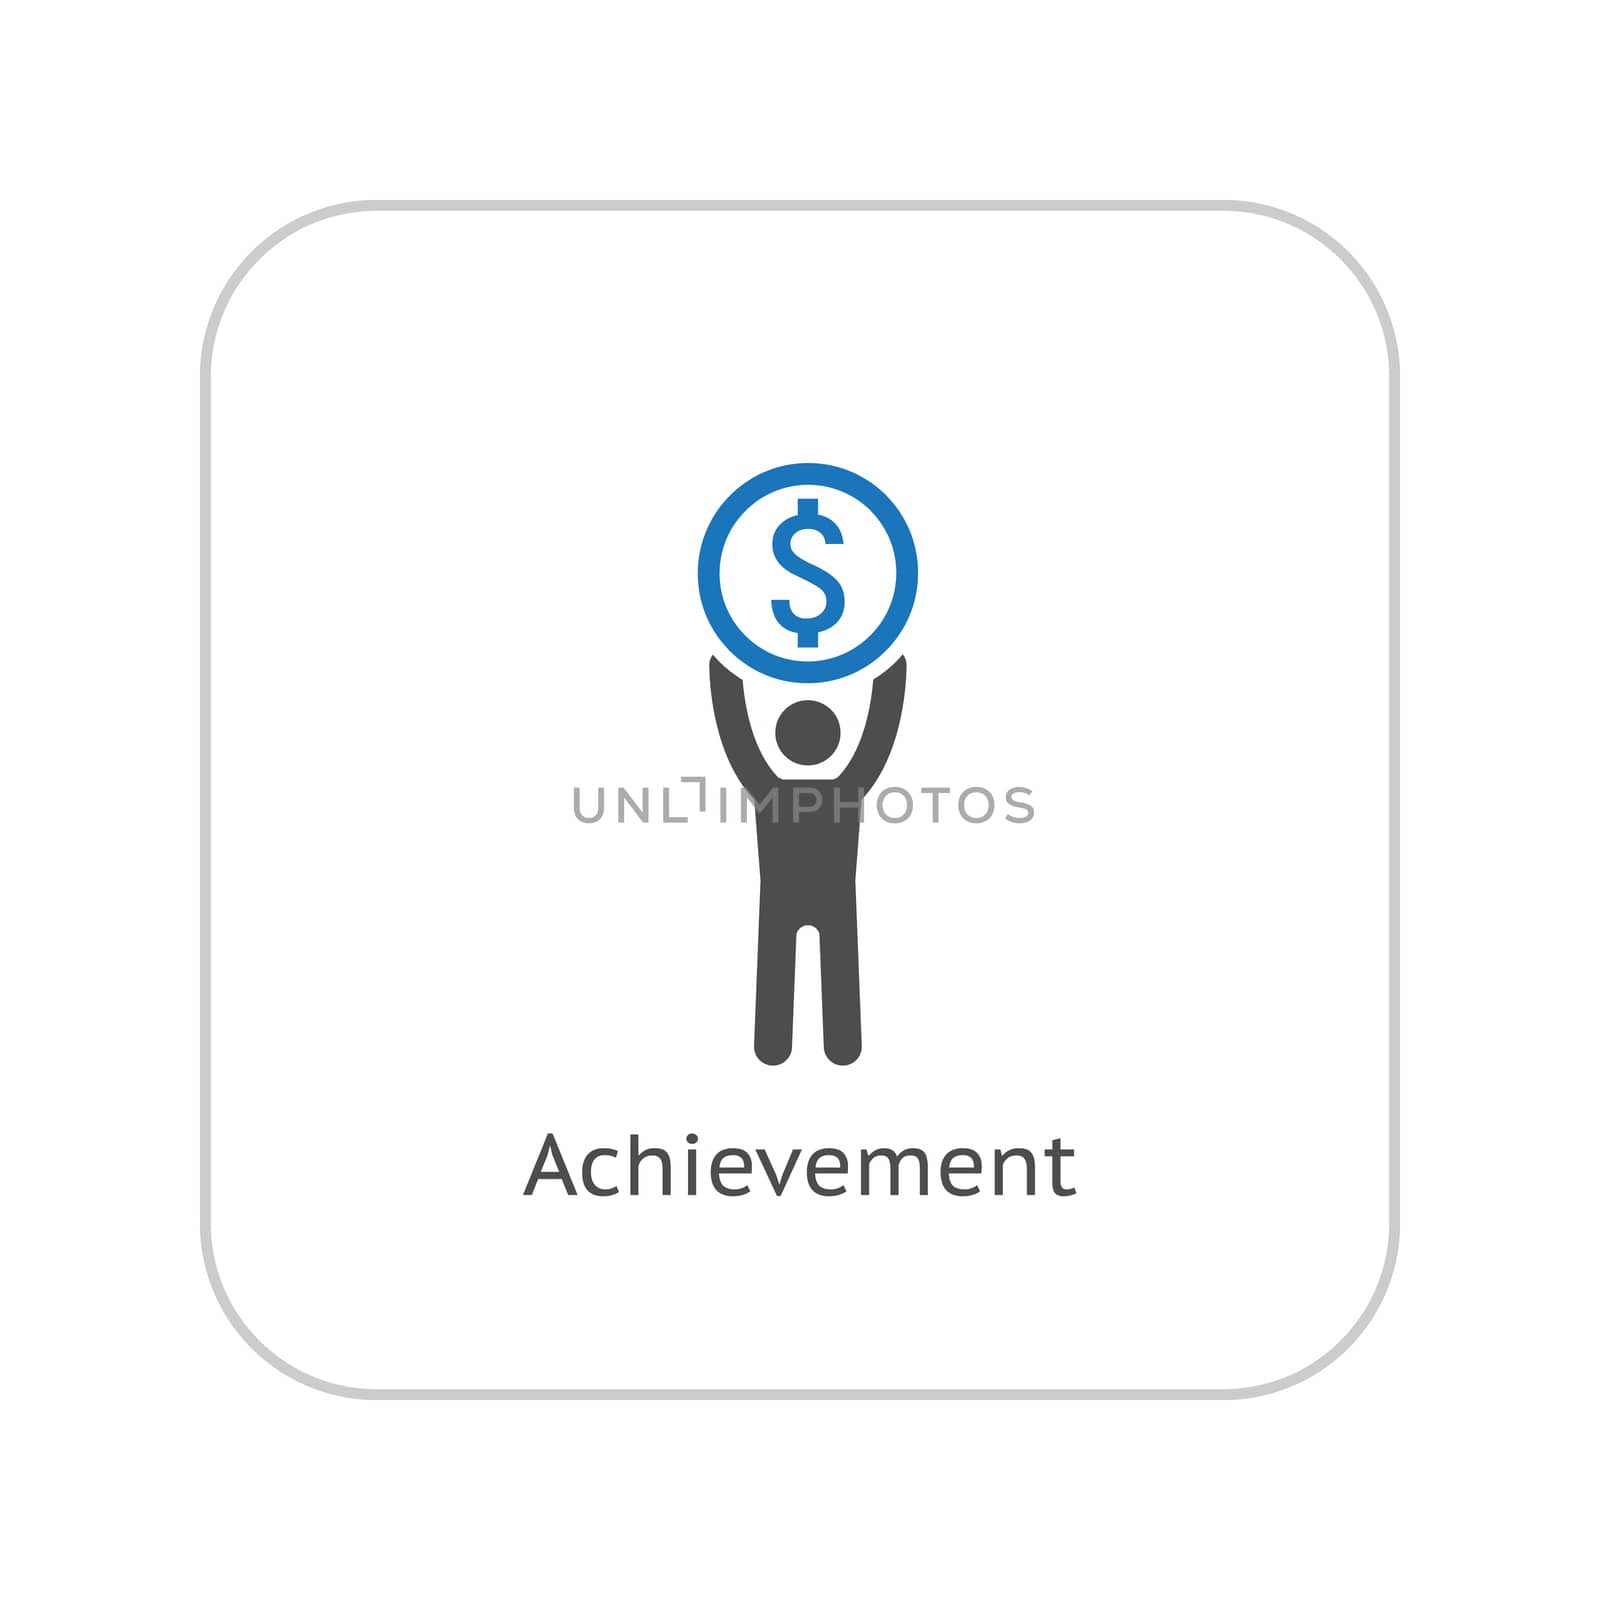 Achievement Icon. Business Concept. Flat Design. Isolated Illustration.